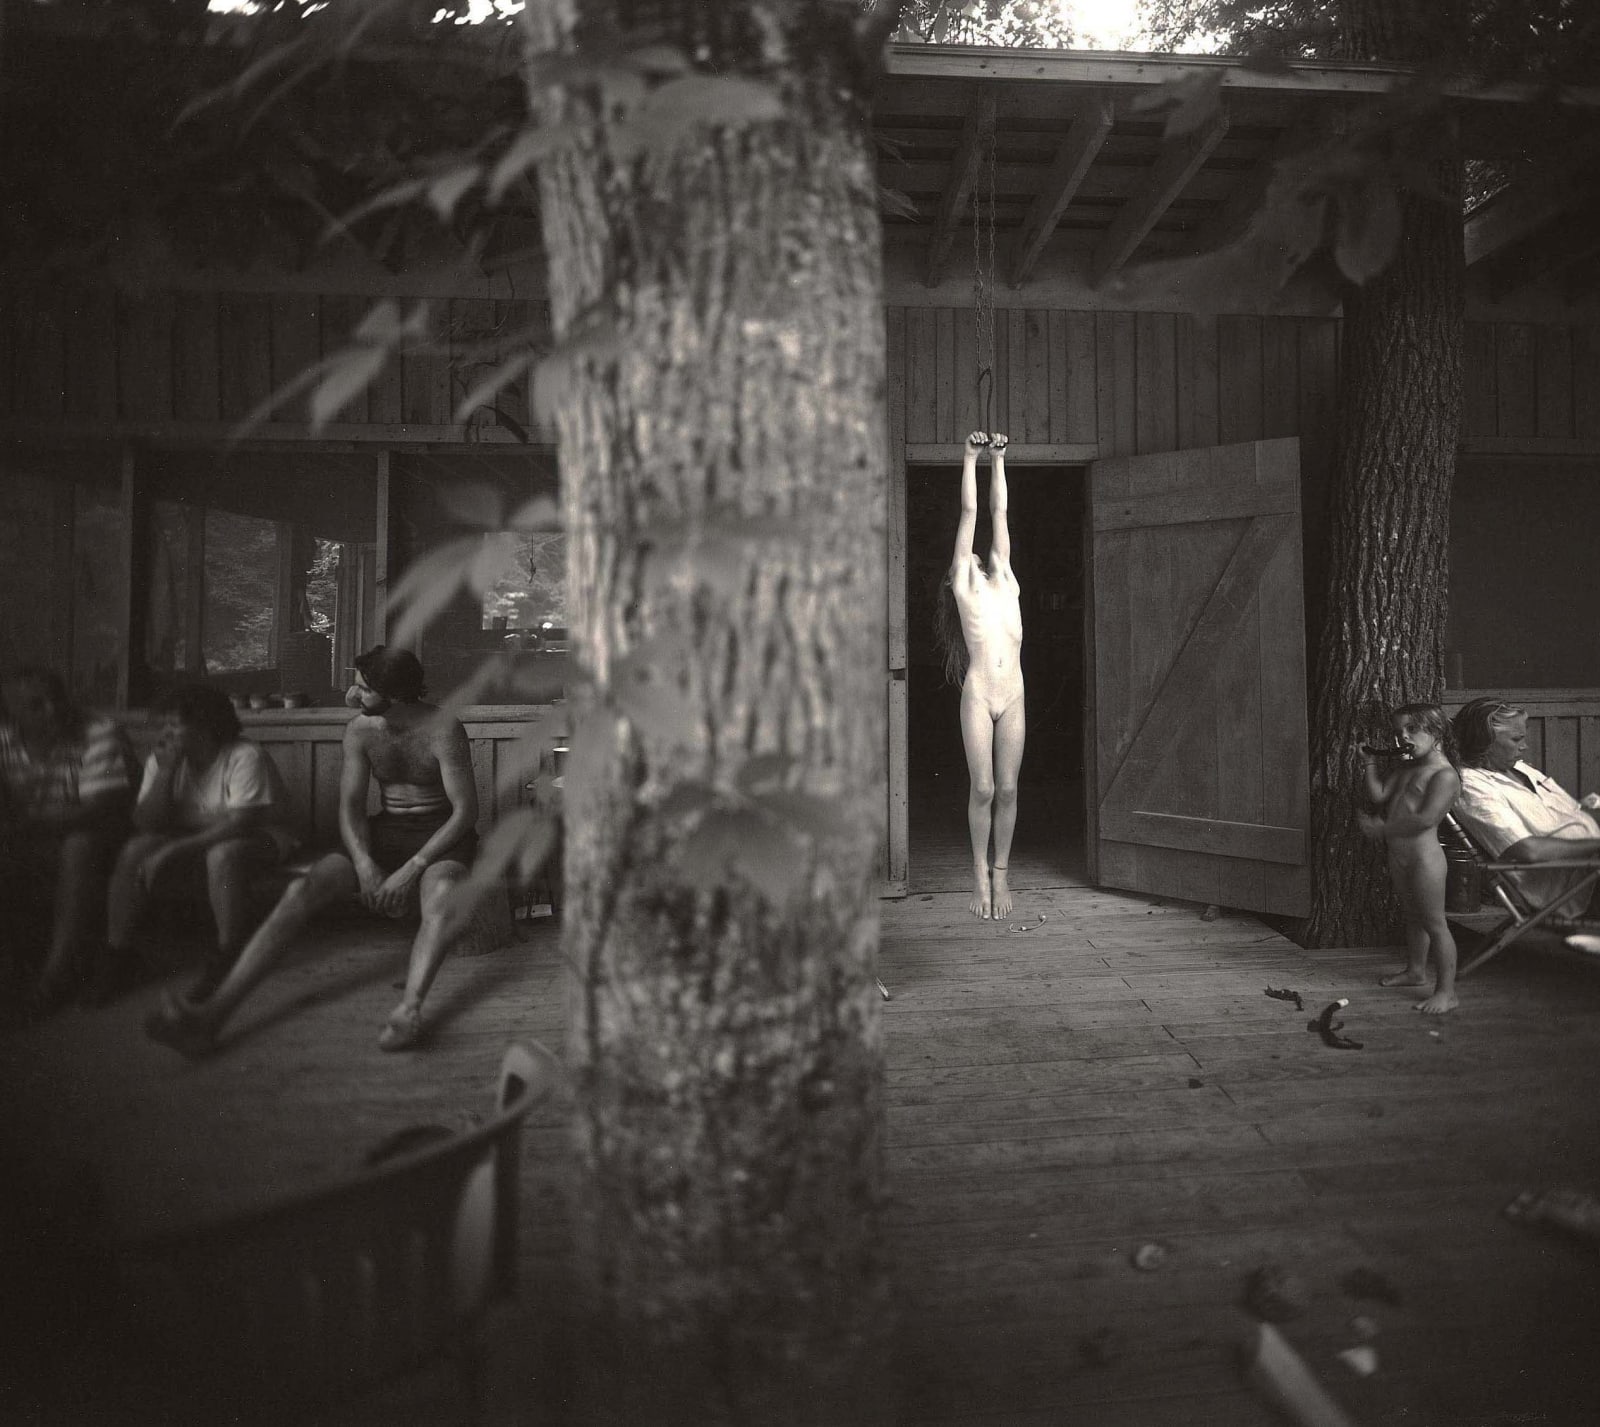 Jessie Mann nude hanging on a hayhook with Larry Mann and Virginia Mann and tree in foreground, from the Immediate Family series by Sally Mann